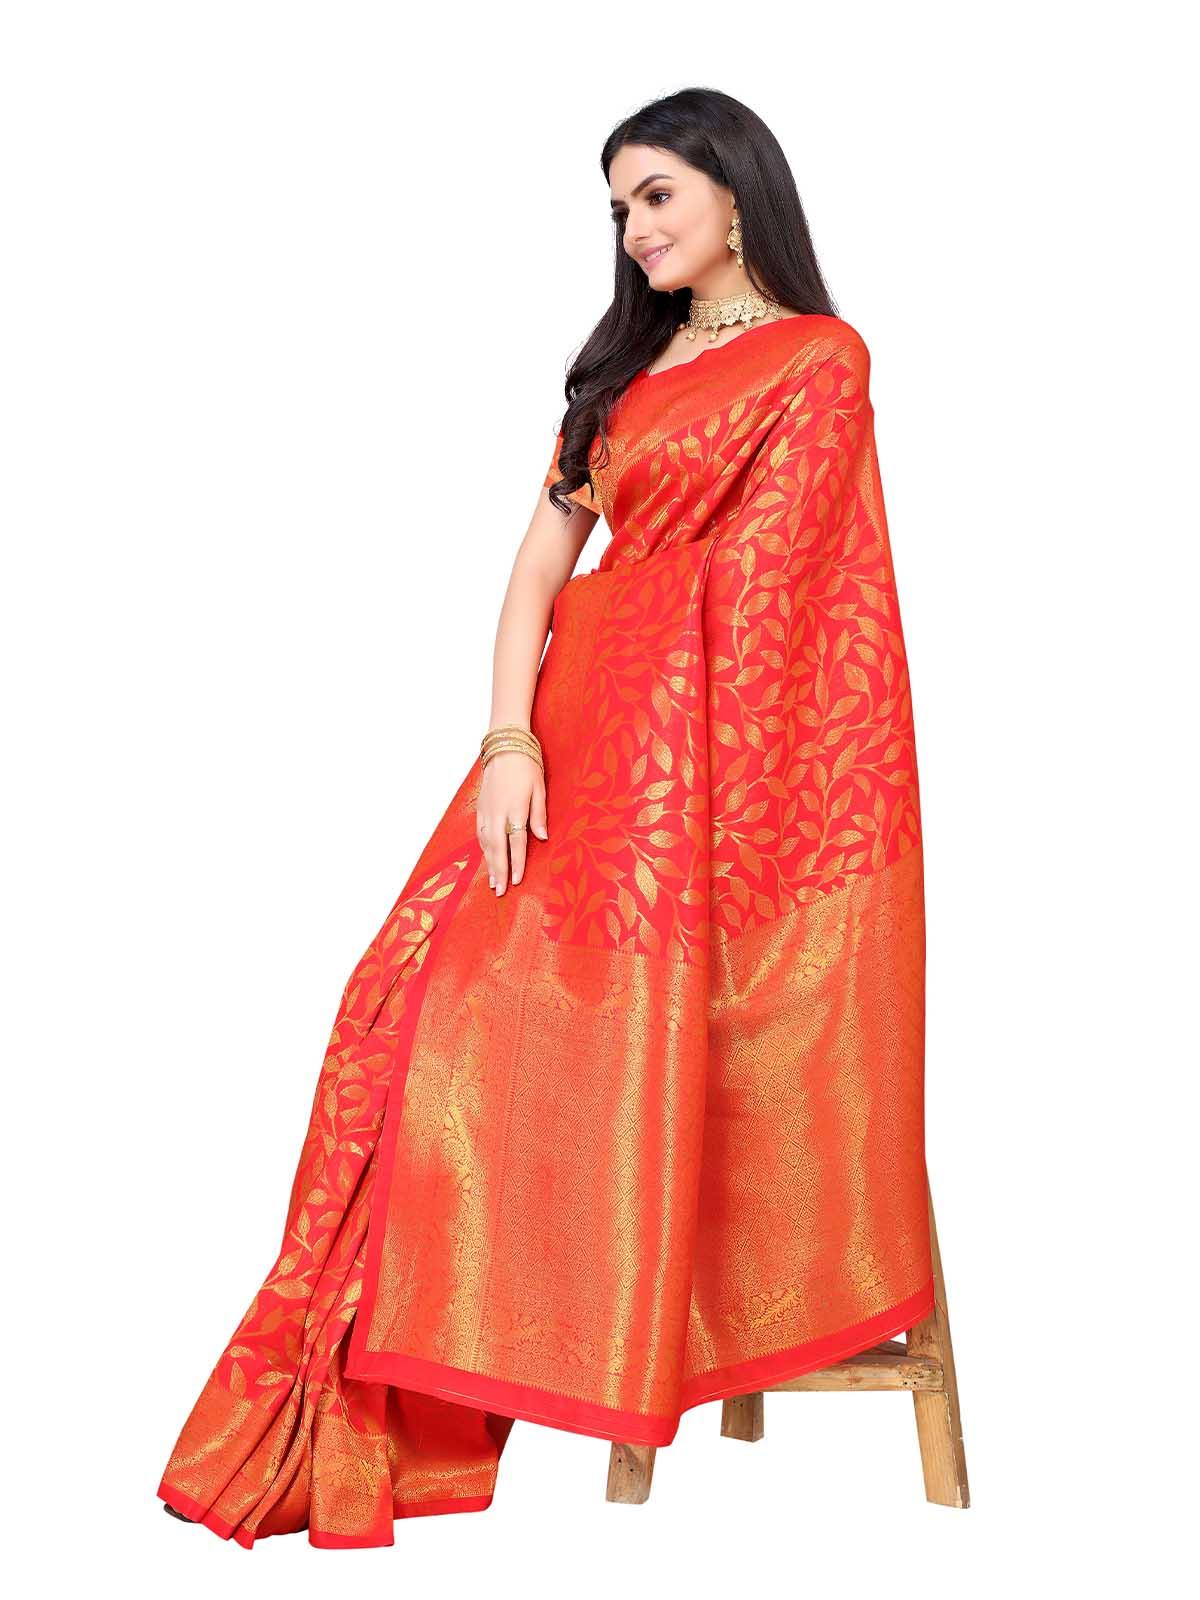 Women's Red Silk Blend Woven Saree With Blouse - Odette